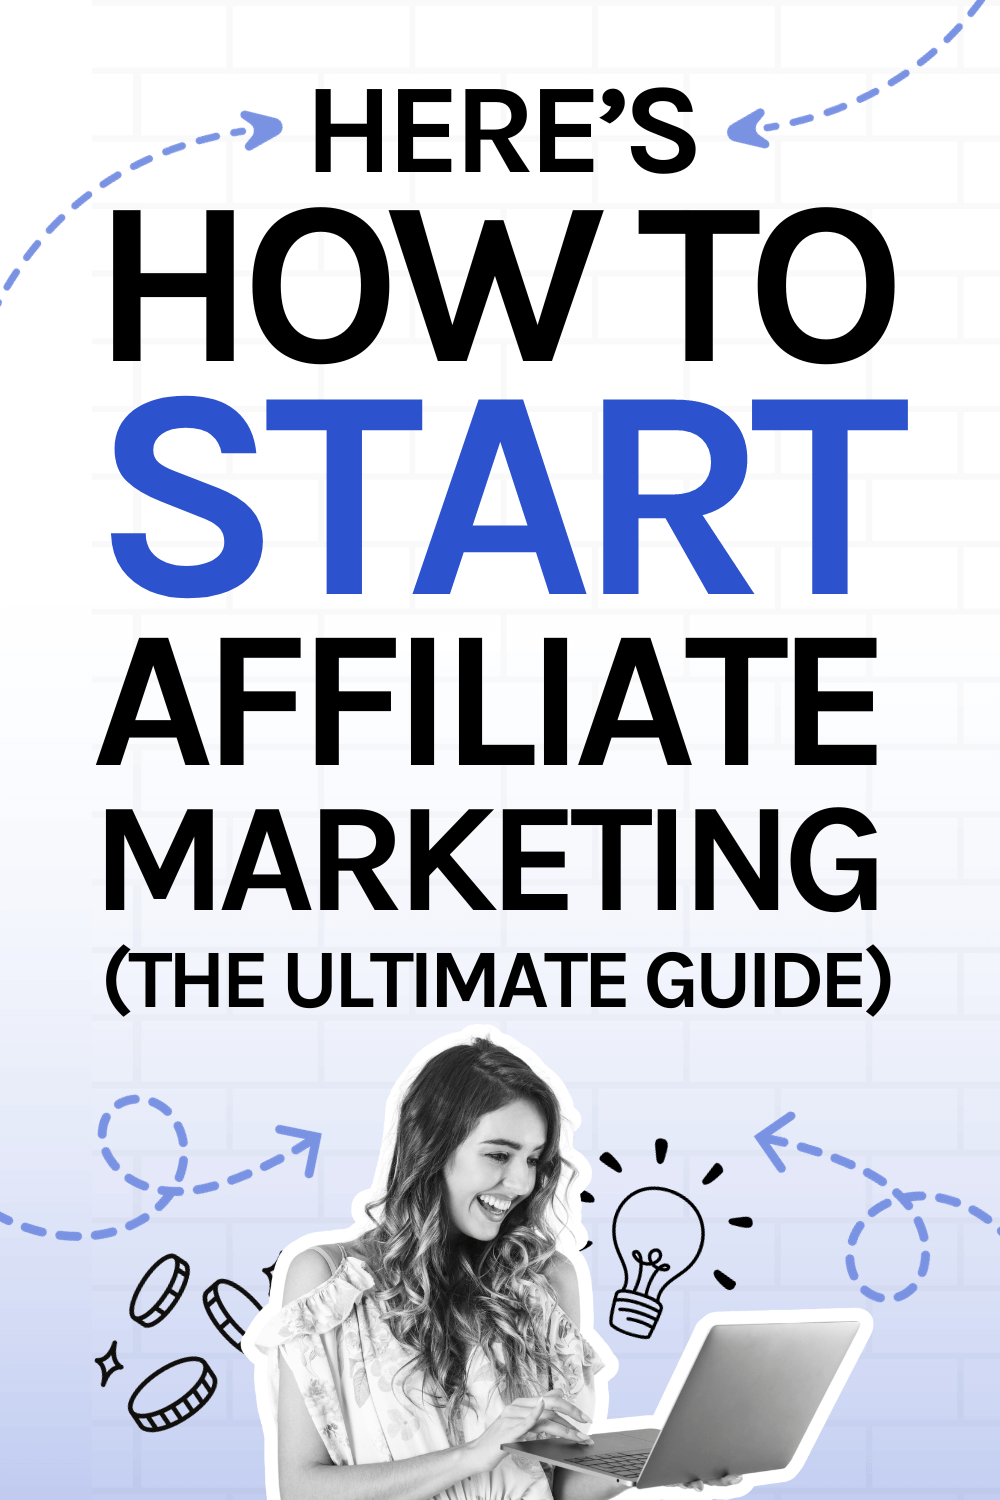 How to start affiliate marketing: The Ultimate guide for beginners to make money blogging